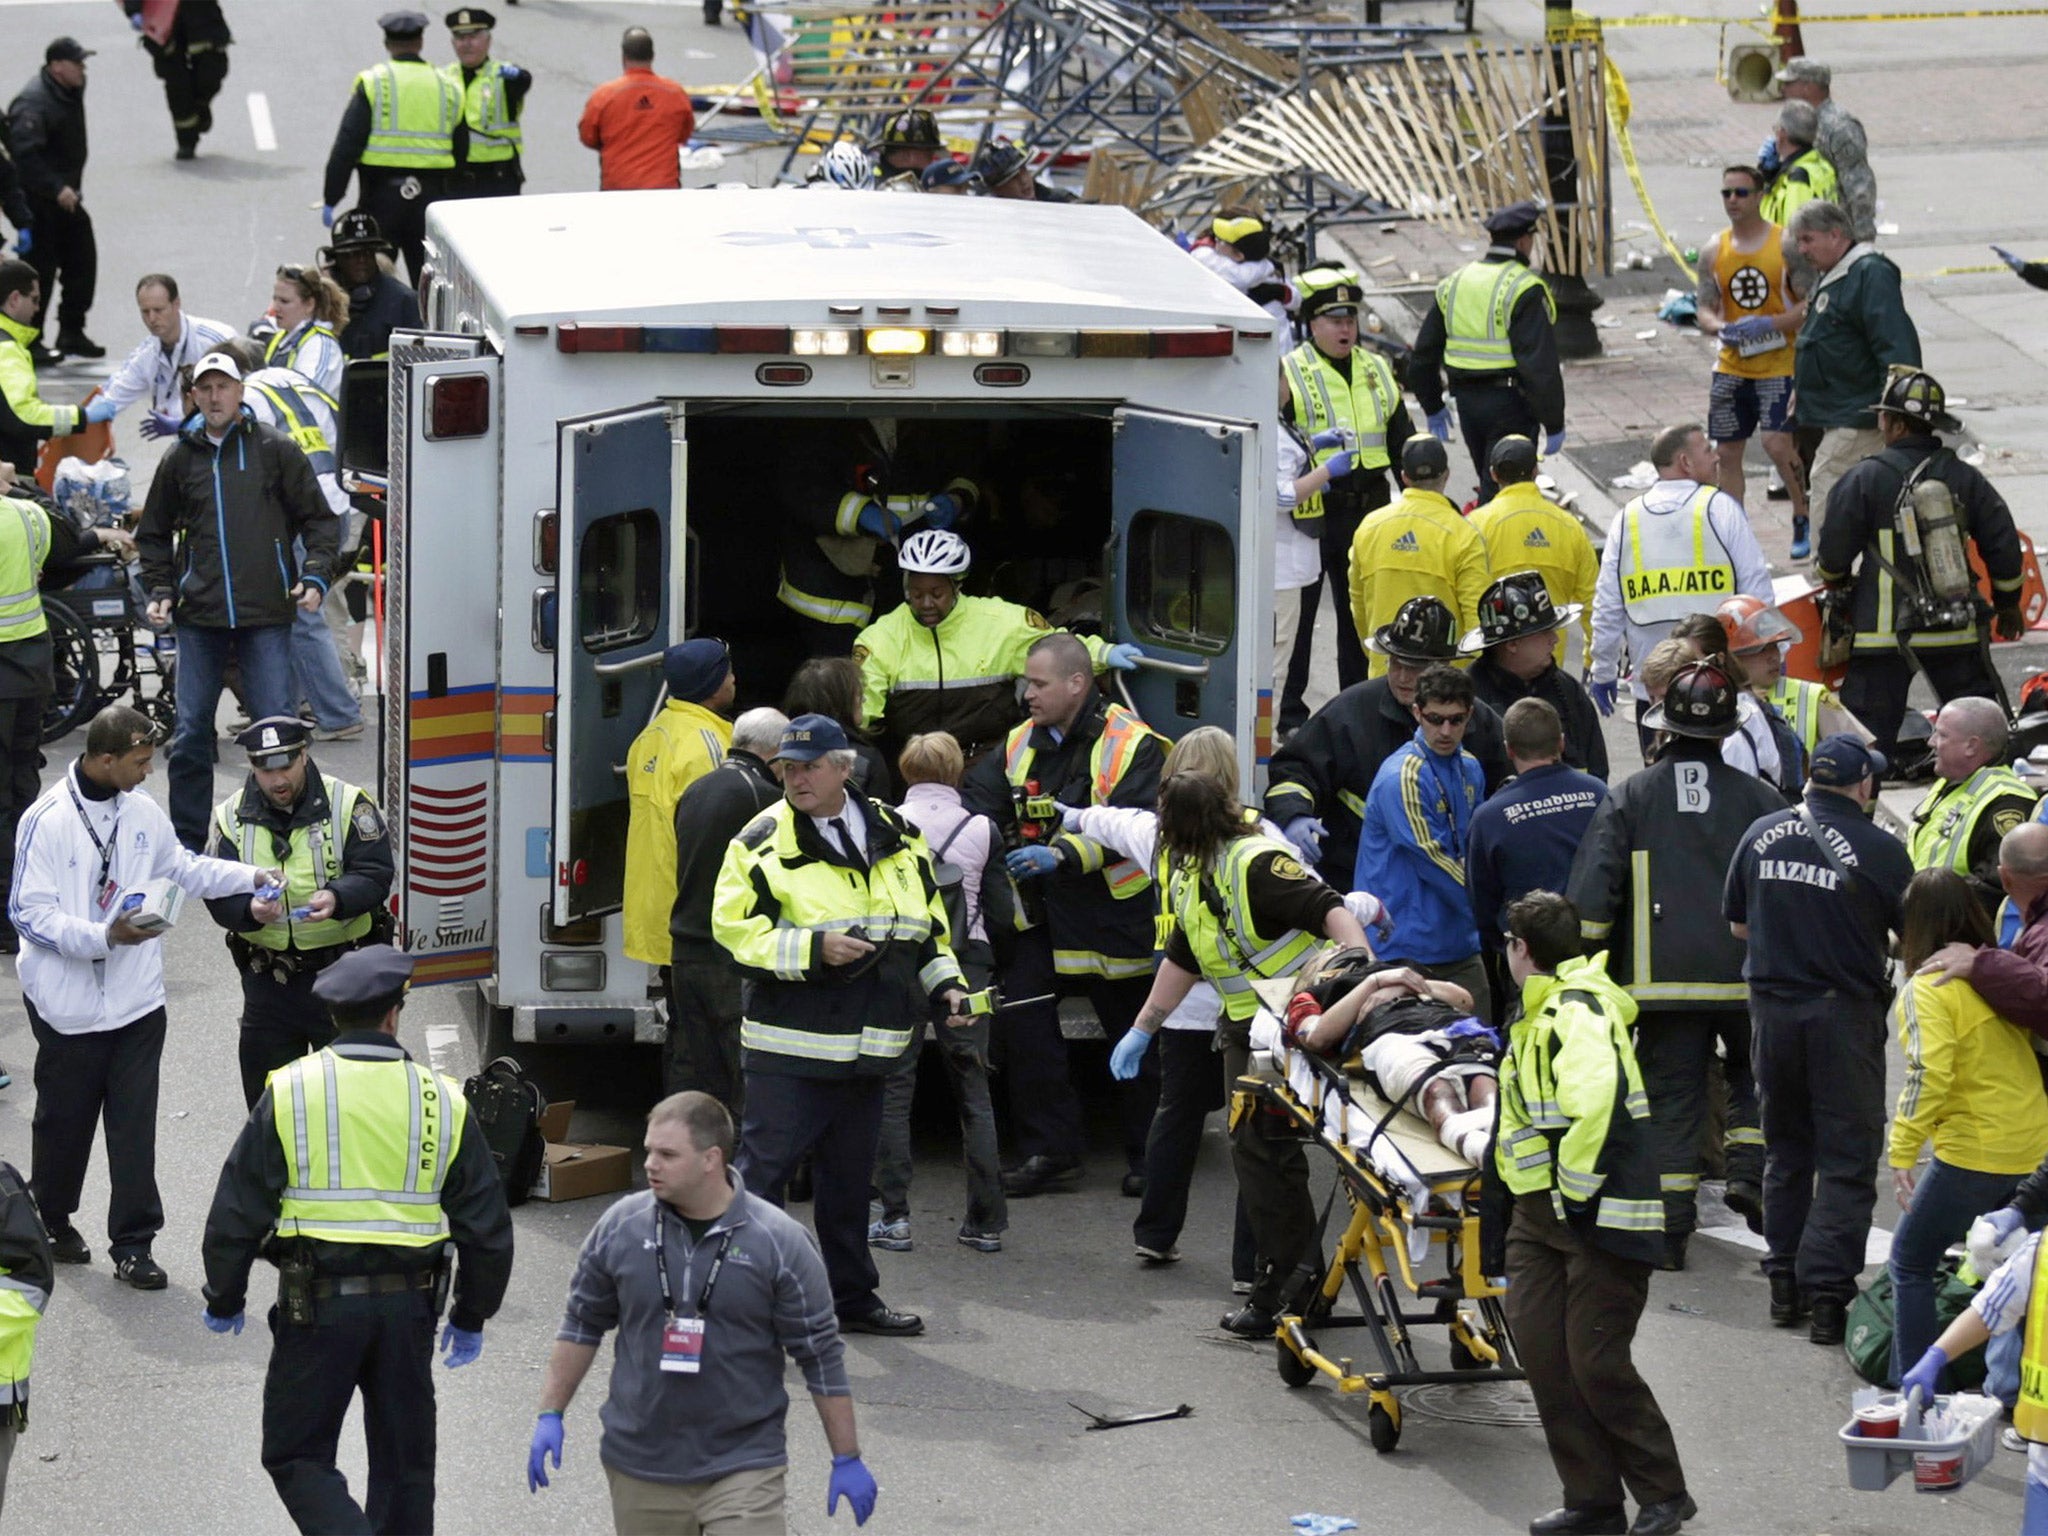 Bombs Used in Boston Marathon Are Common in South Asia - The New